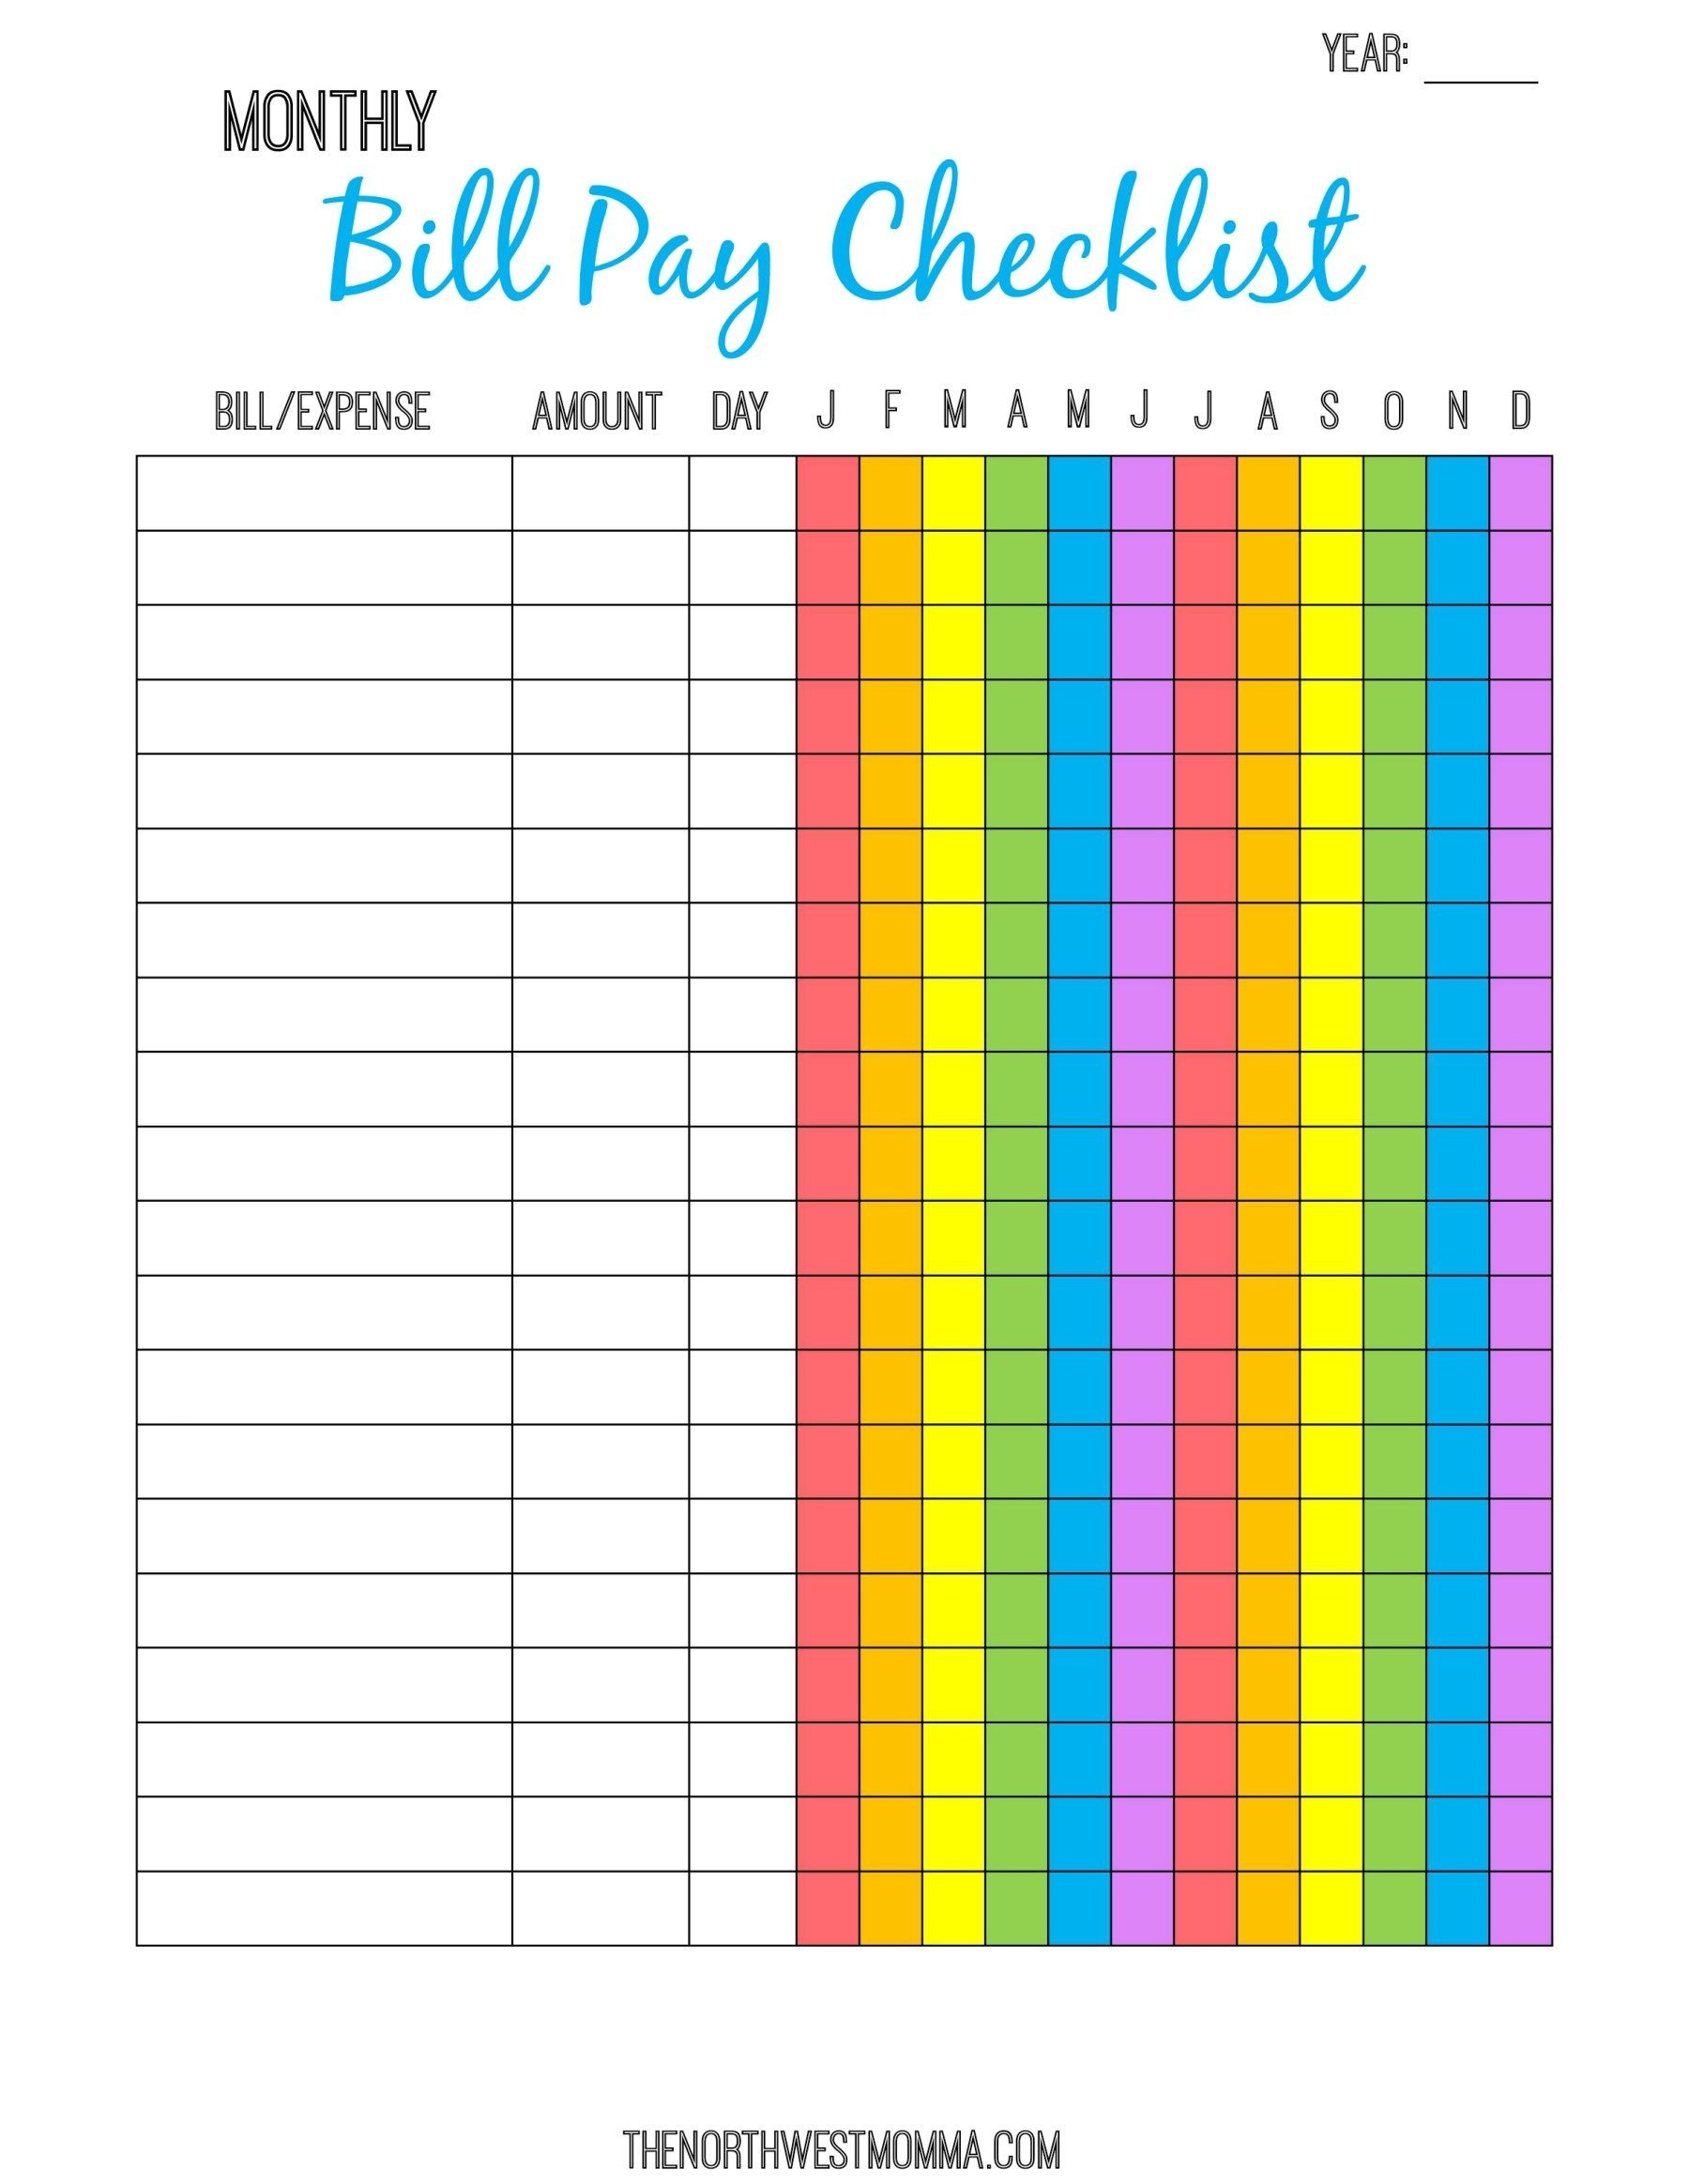 Monthly Bill Pay Checklist- Free Printable! | Organizing  Blank Bill Paying Sheet